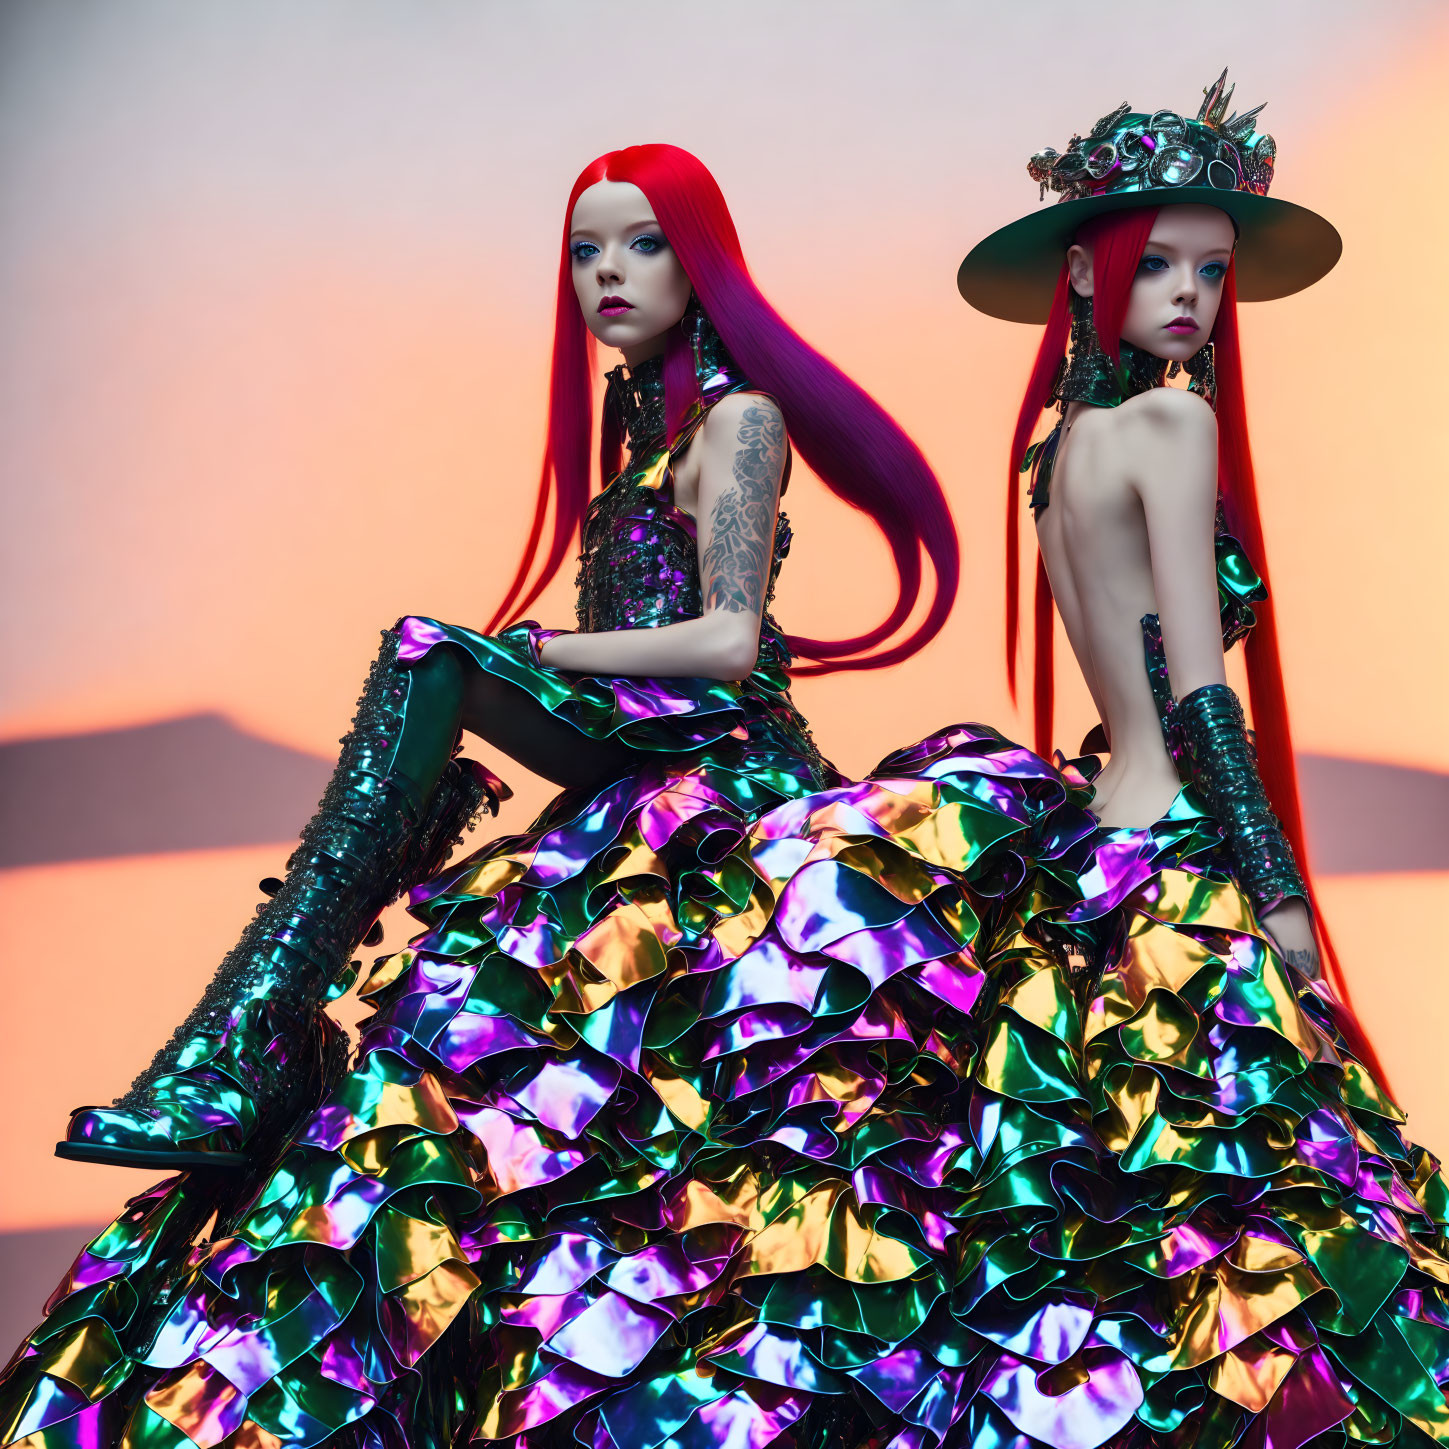 Avant-garde outfit on mannequins against gradient background